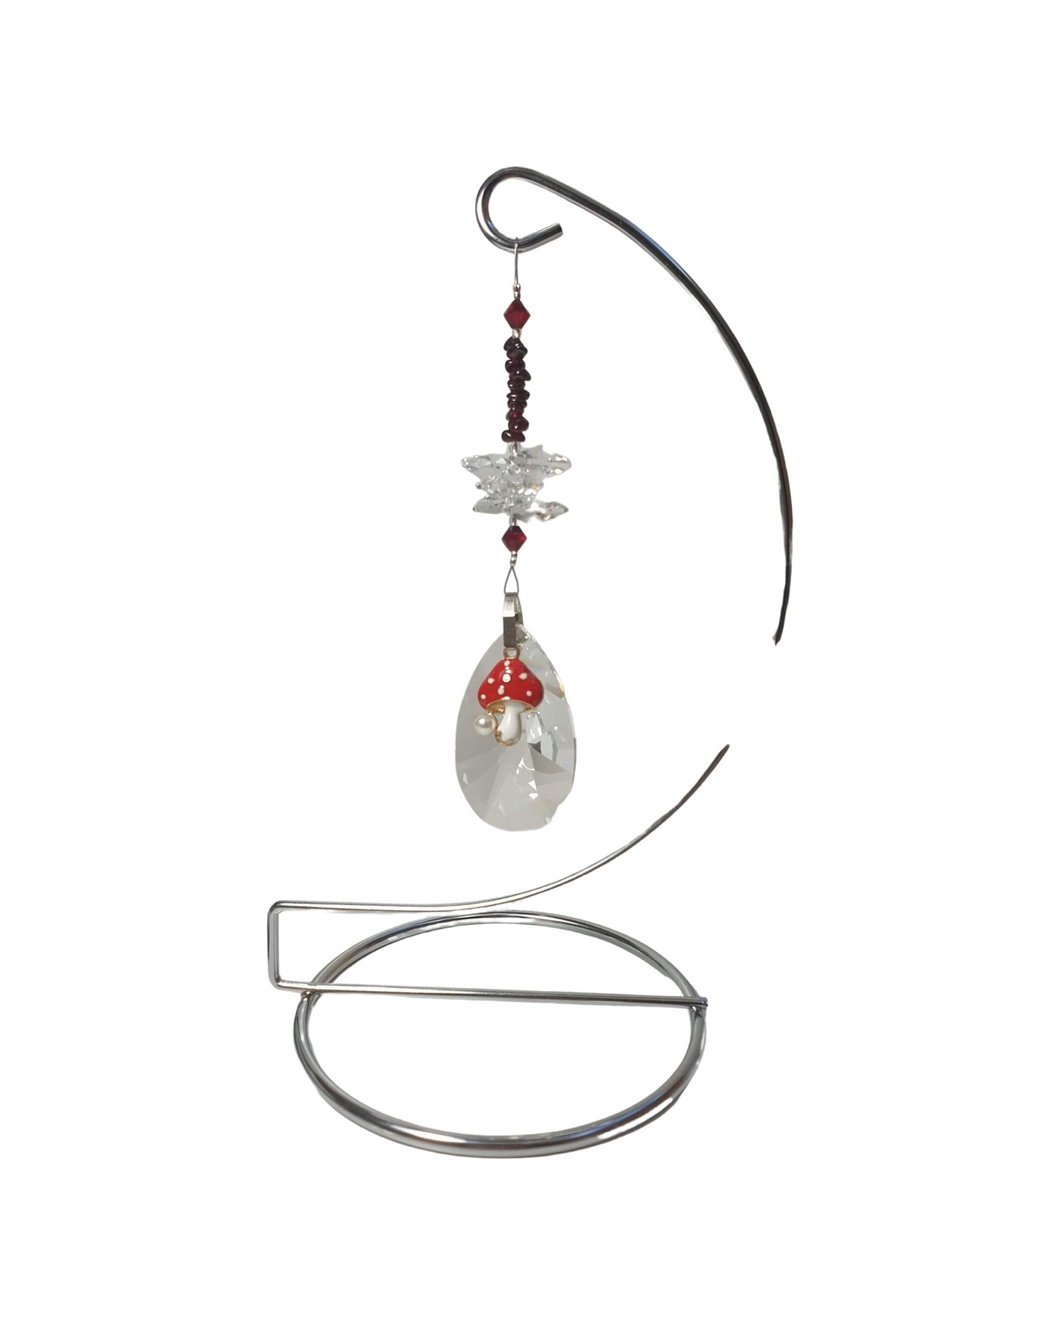 Mushroom -  crystal suncatcher is decorated with garnet gemstones and come on this amazing large stand.